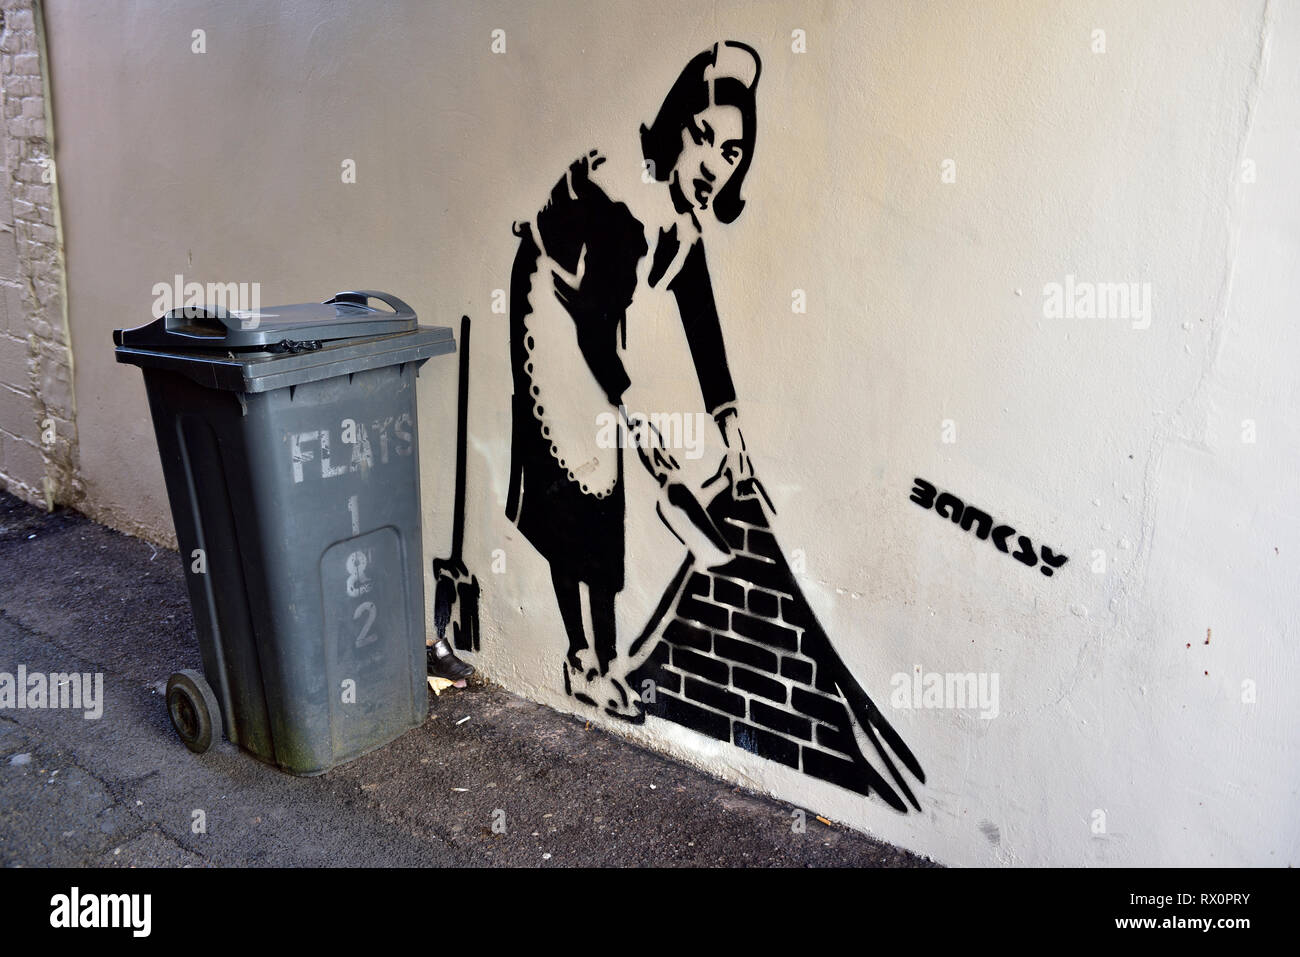 Stencil painting on wall of woman with dustpan with real rubbish bin next to painting, Question if Bansky Stock Photo